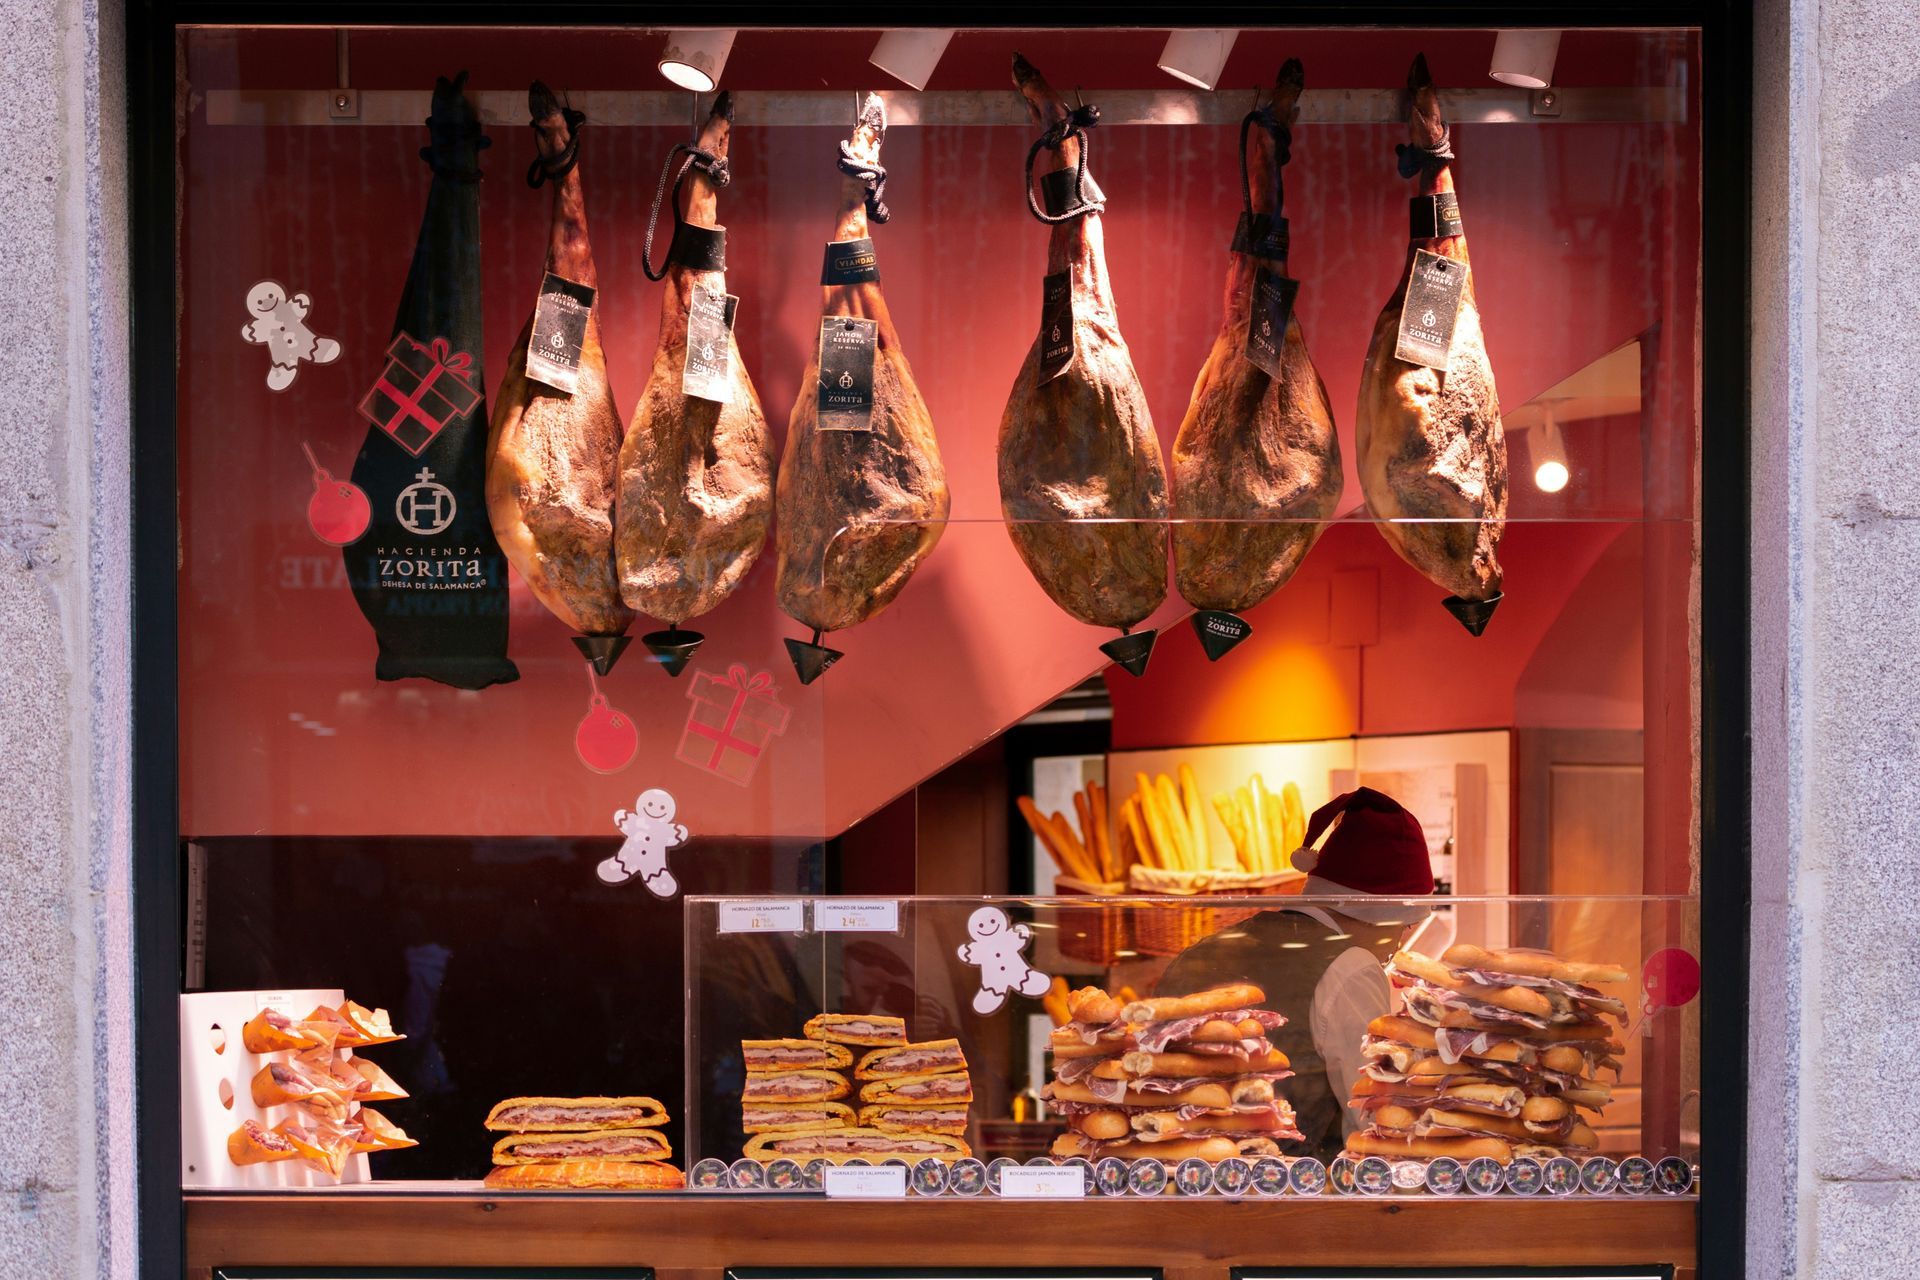 Meat dishes from Costa Brava